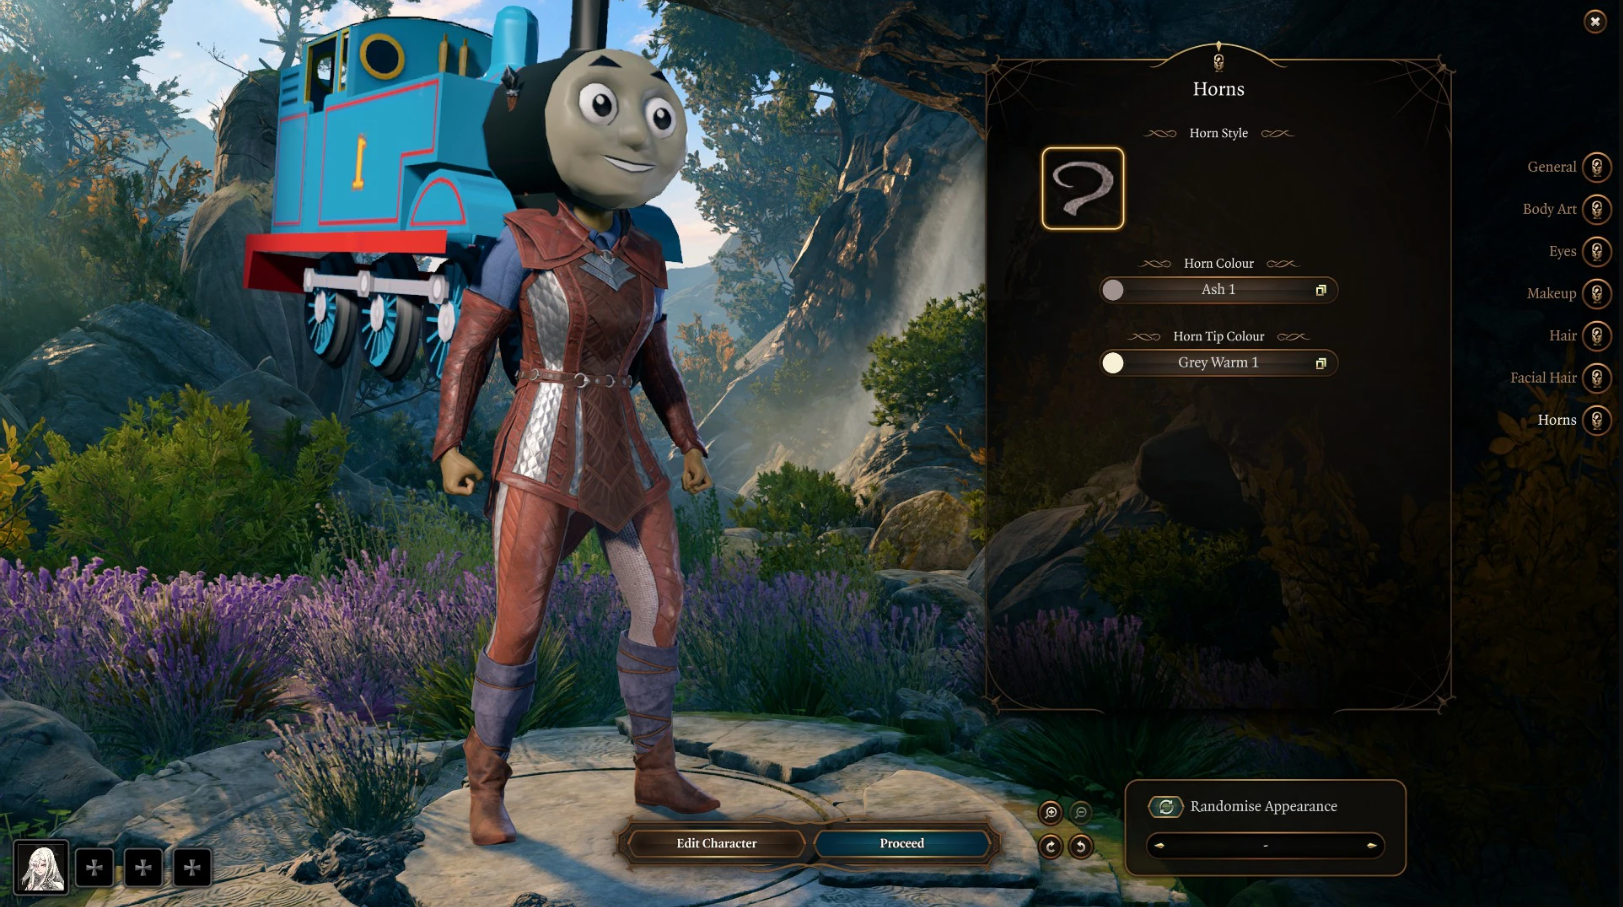 Thomas the Tank Engine stands proudly in Baldur's Gate 3's character select screen.